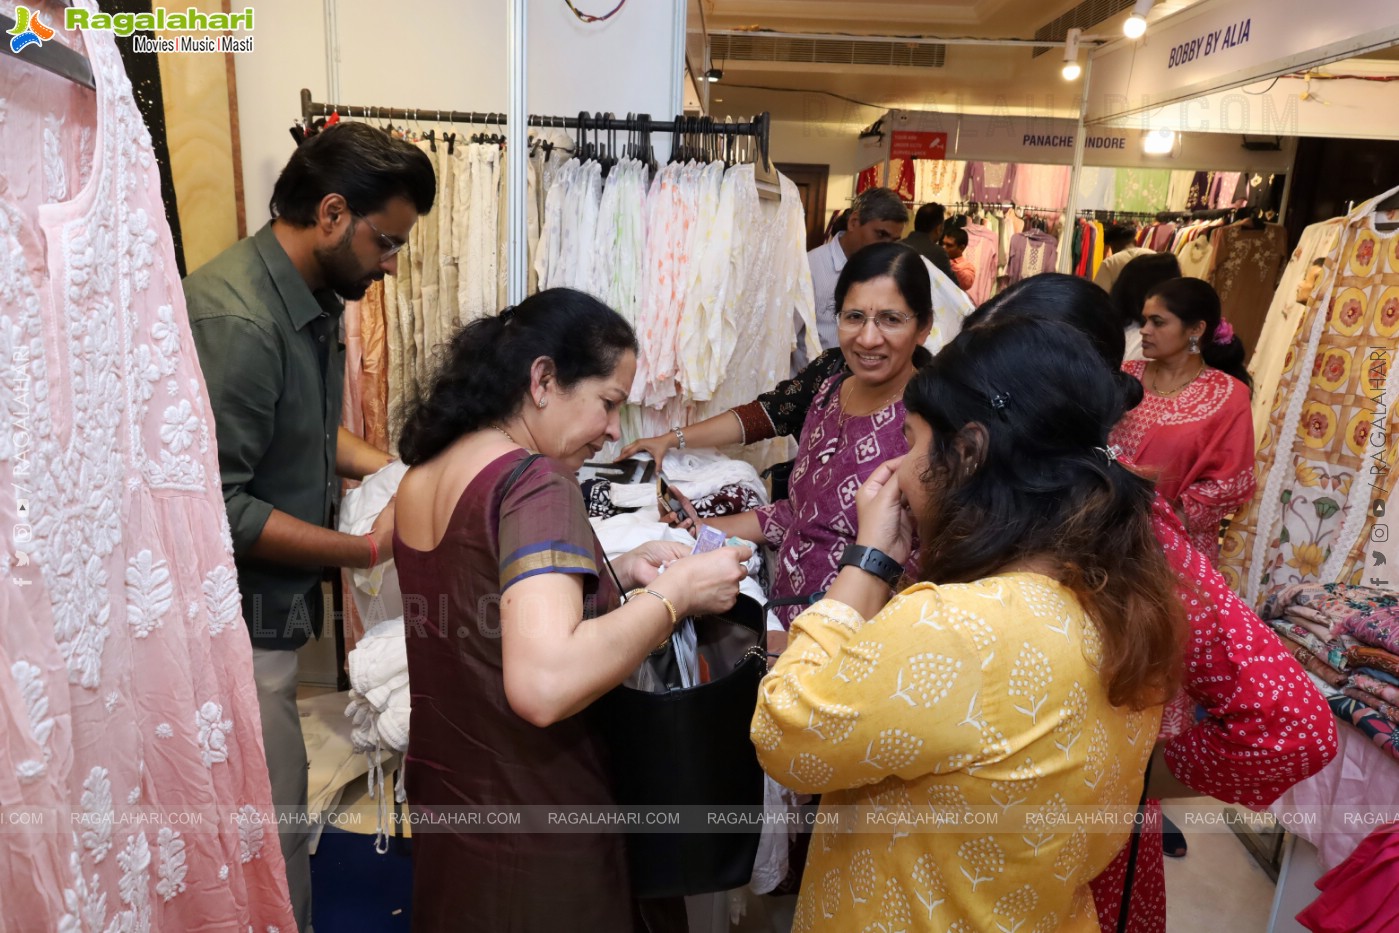 Sutraa Exhibition, Hyderabad inaugurated by big boss fame Inaya Sultan